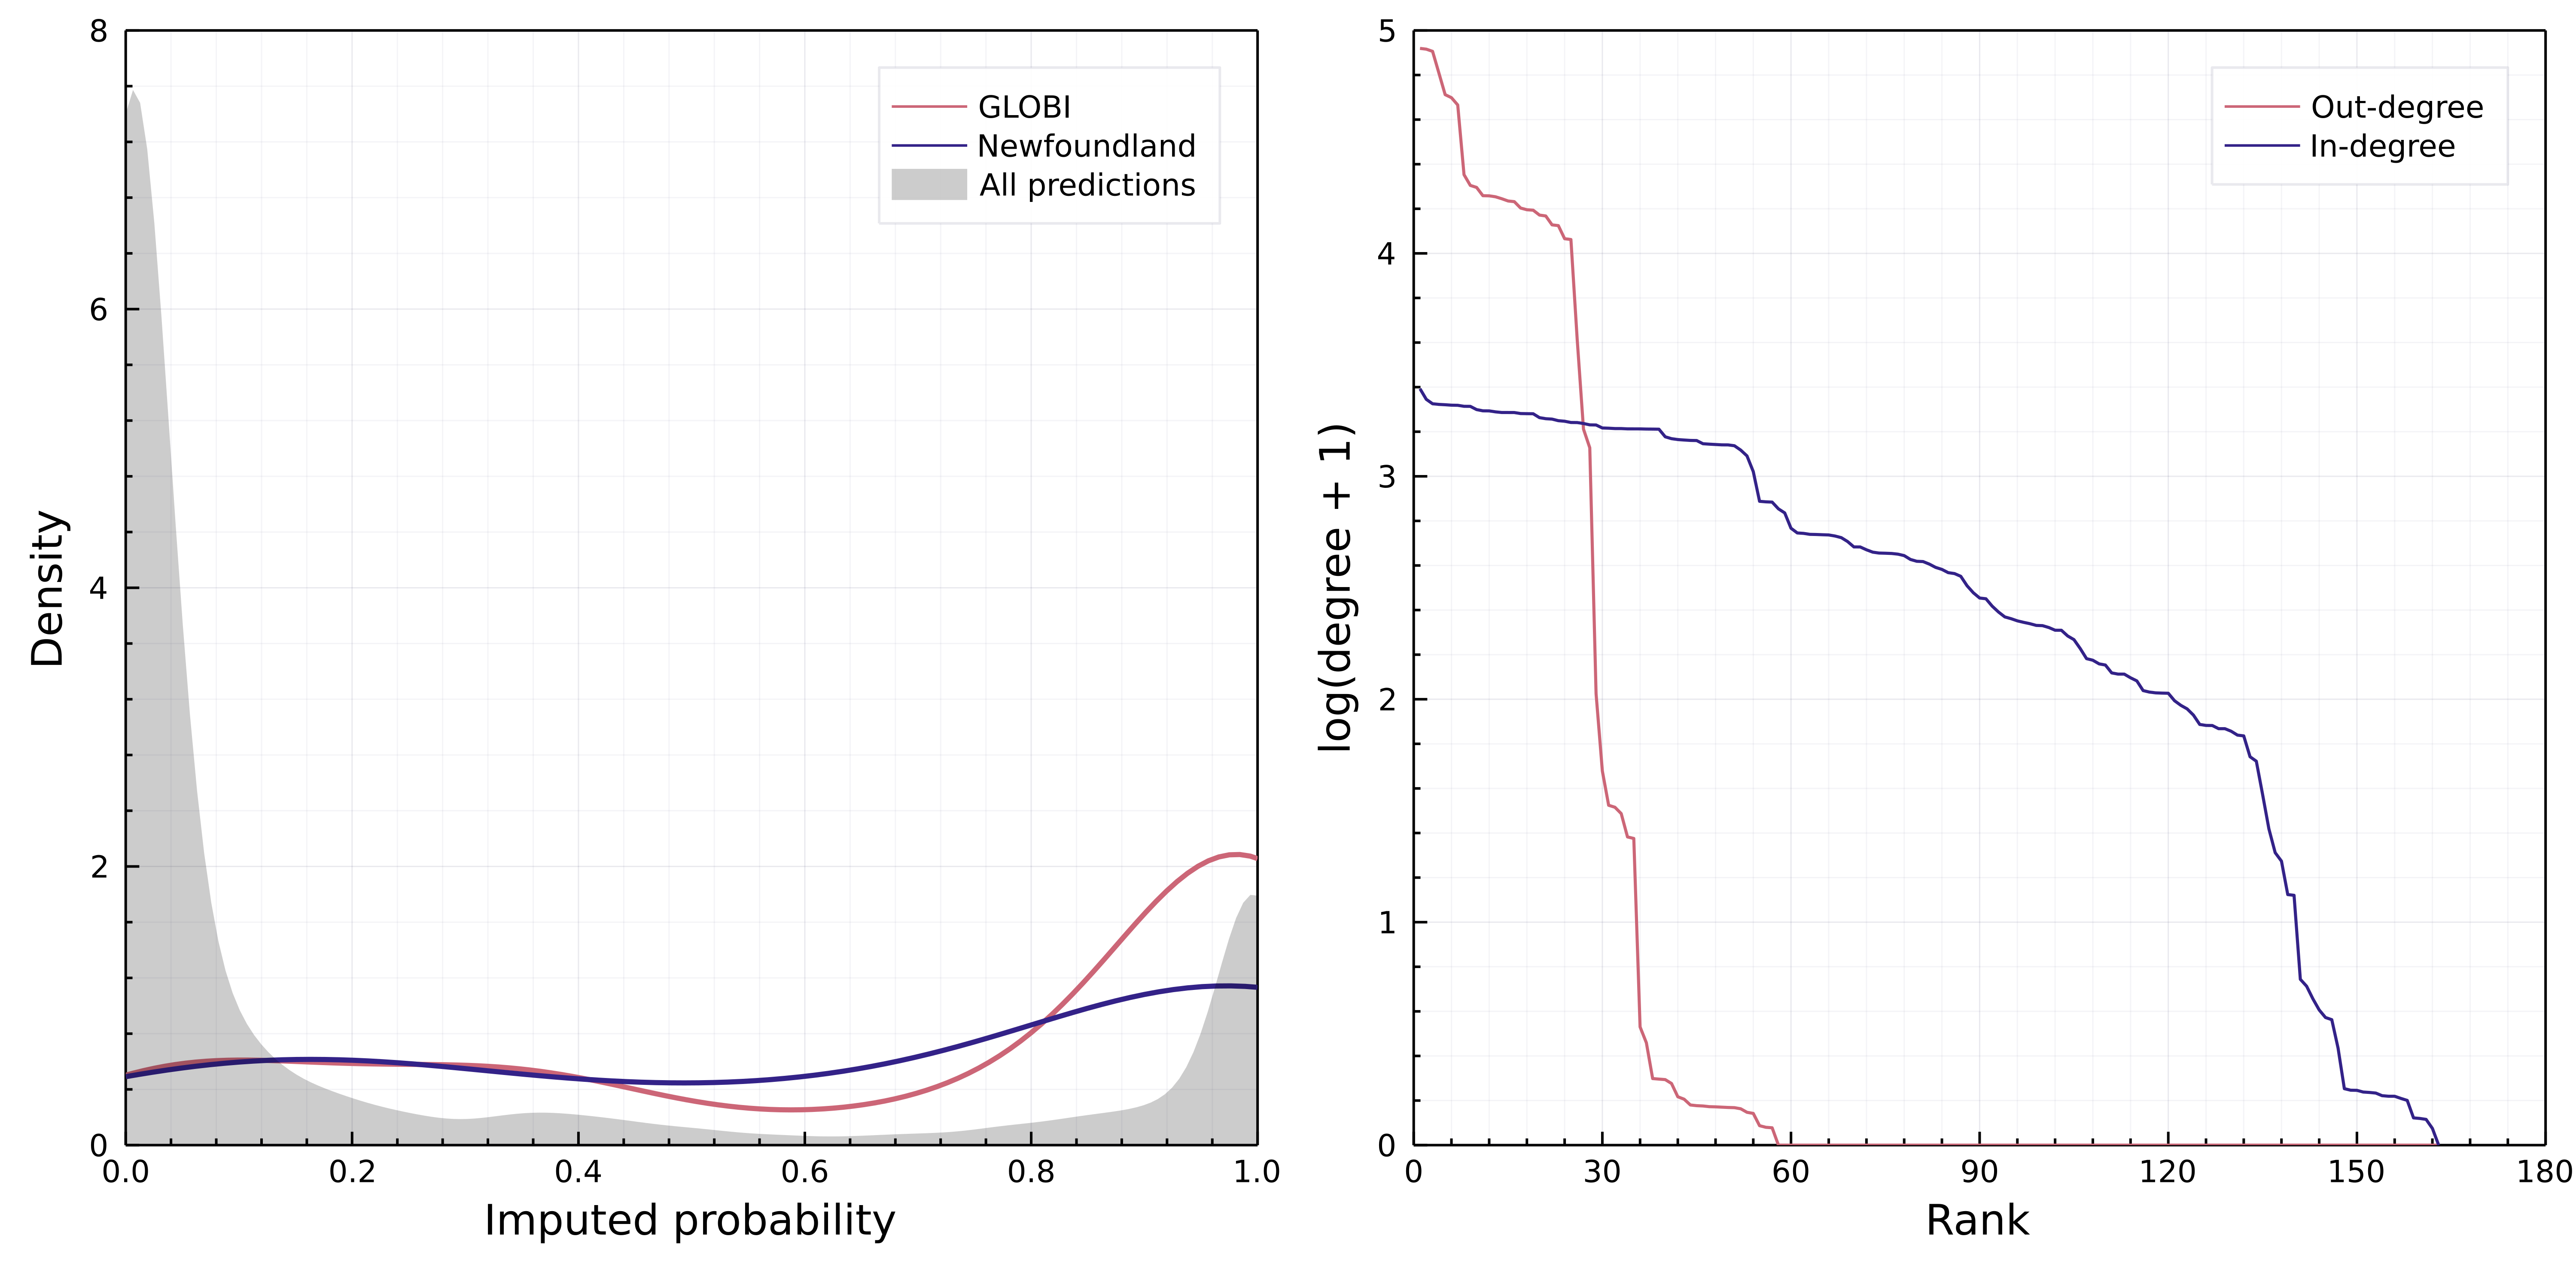 Figure 4: Left: comparison of the probabilities of interactions assigned by the model to all interactions (grey curve), the subset of interactions found in GloBI (red), and in the Strong & Leroux (2014) Newfoundland dataset (blue). The model recovers more interactions with a low probability compared to data mining, which can suggest that collected datasets are biased towards more common or easy to identify interactions. Right: distribution of the in-degree and out-degree of the mammals from Canada in the reconstructed metaweb, where the rank is the maximal number of linearly independent columns (interactions) in the metaweb. This figure describes a flat, relatively short food web, in which there are few predators but a large number of preys.